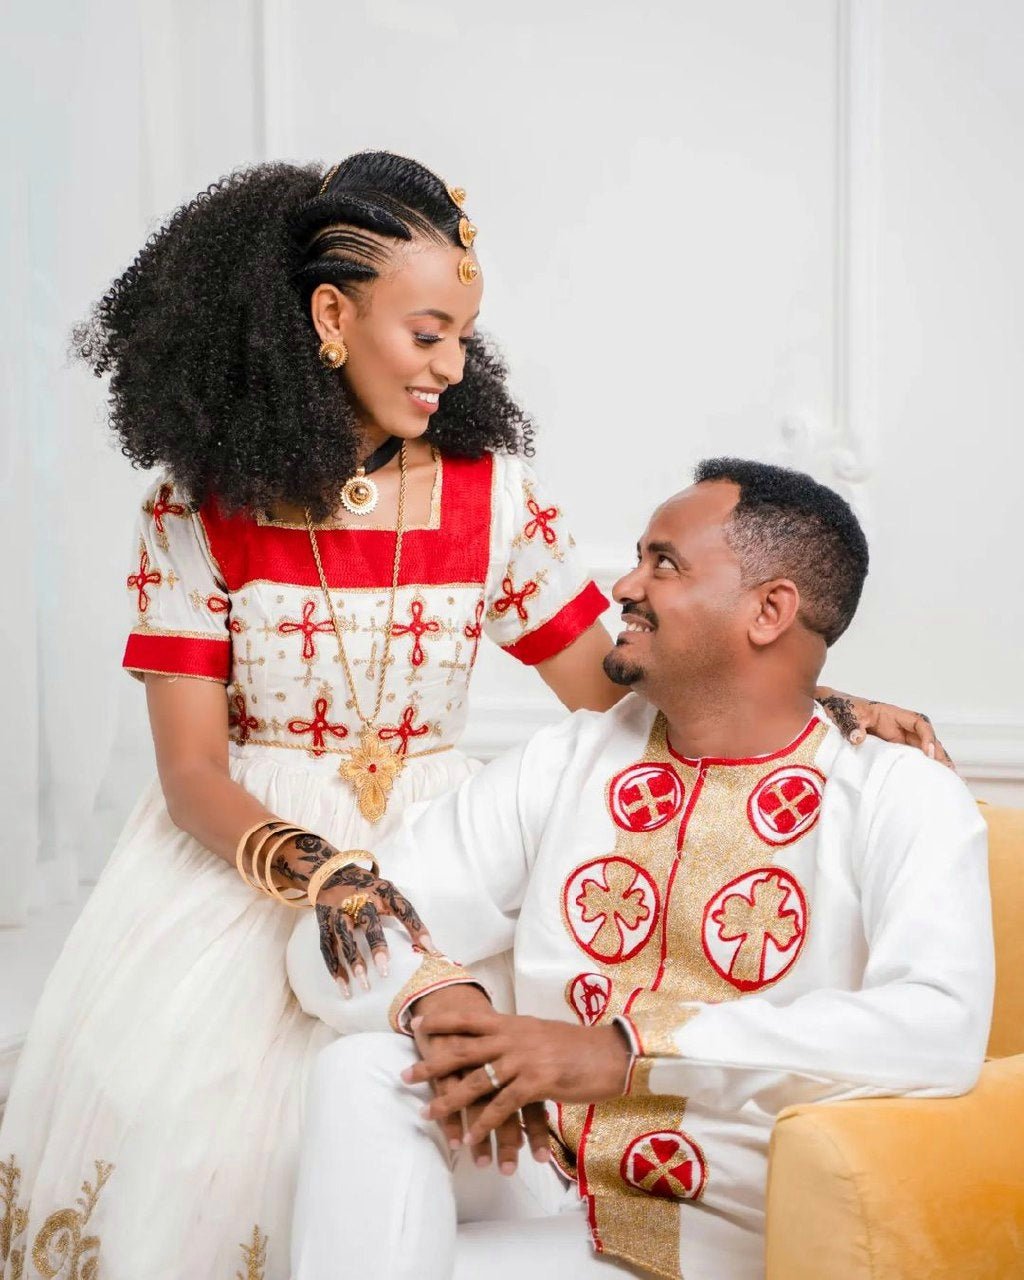 Radiant Red Habesha Couples Outfit Vibrant Habesha Couples' Attire / Includes man's pants and shoes